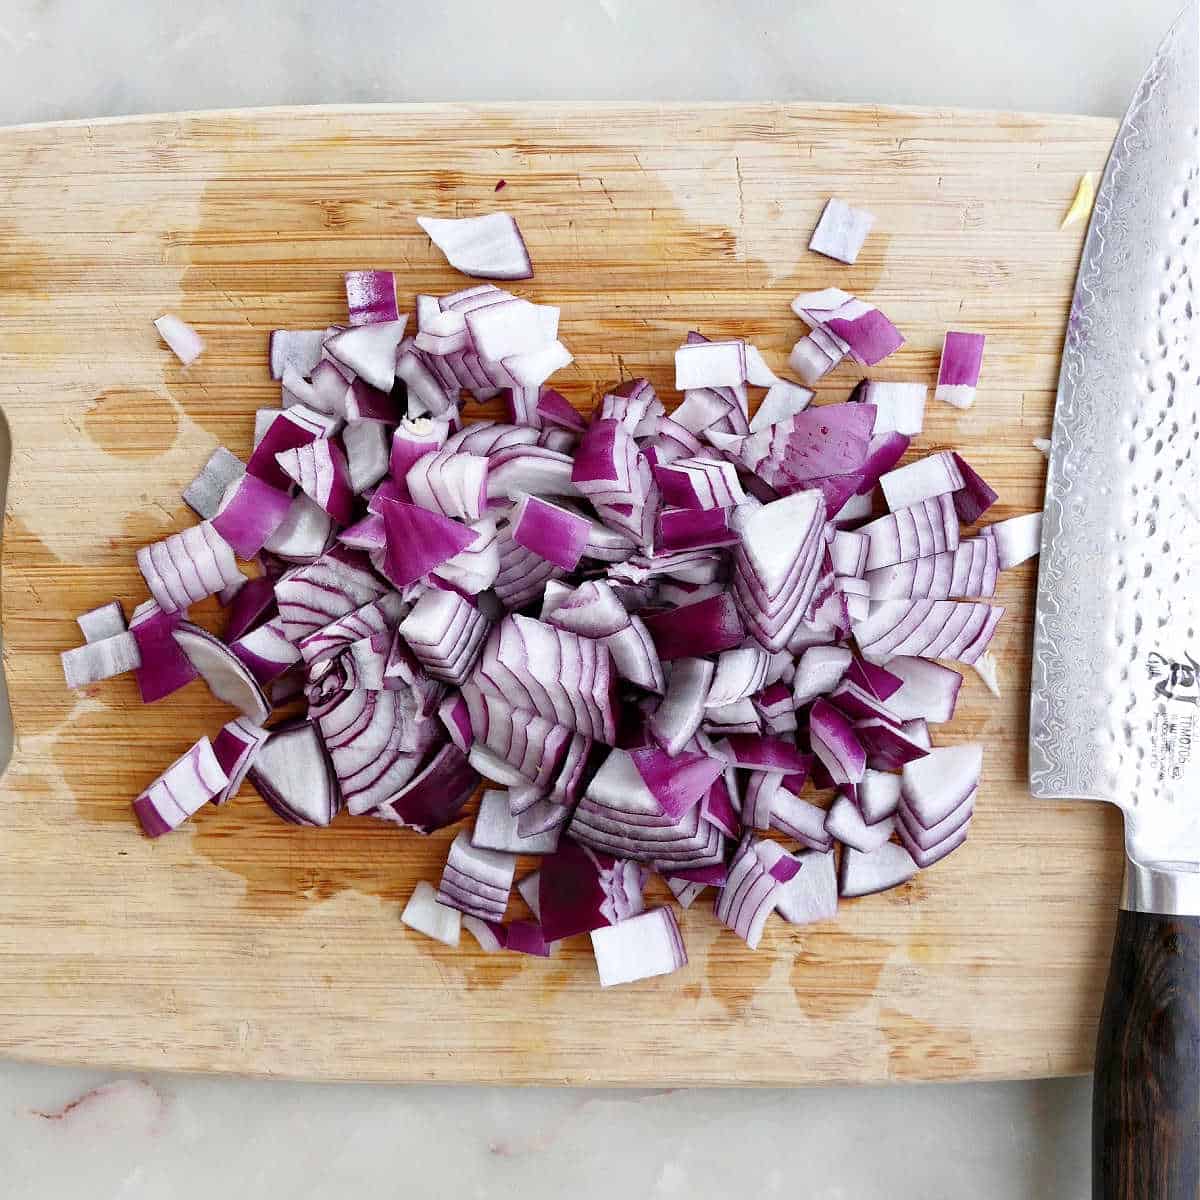 red onion diced into pieces on a cutting board next to a knife